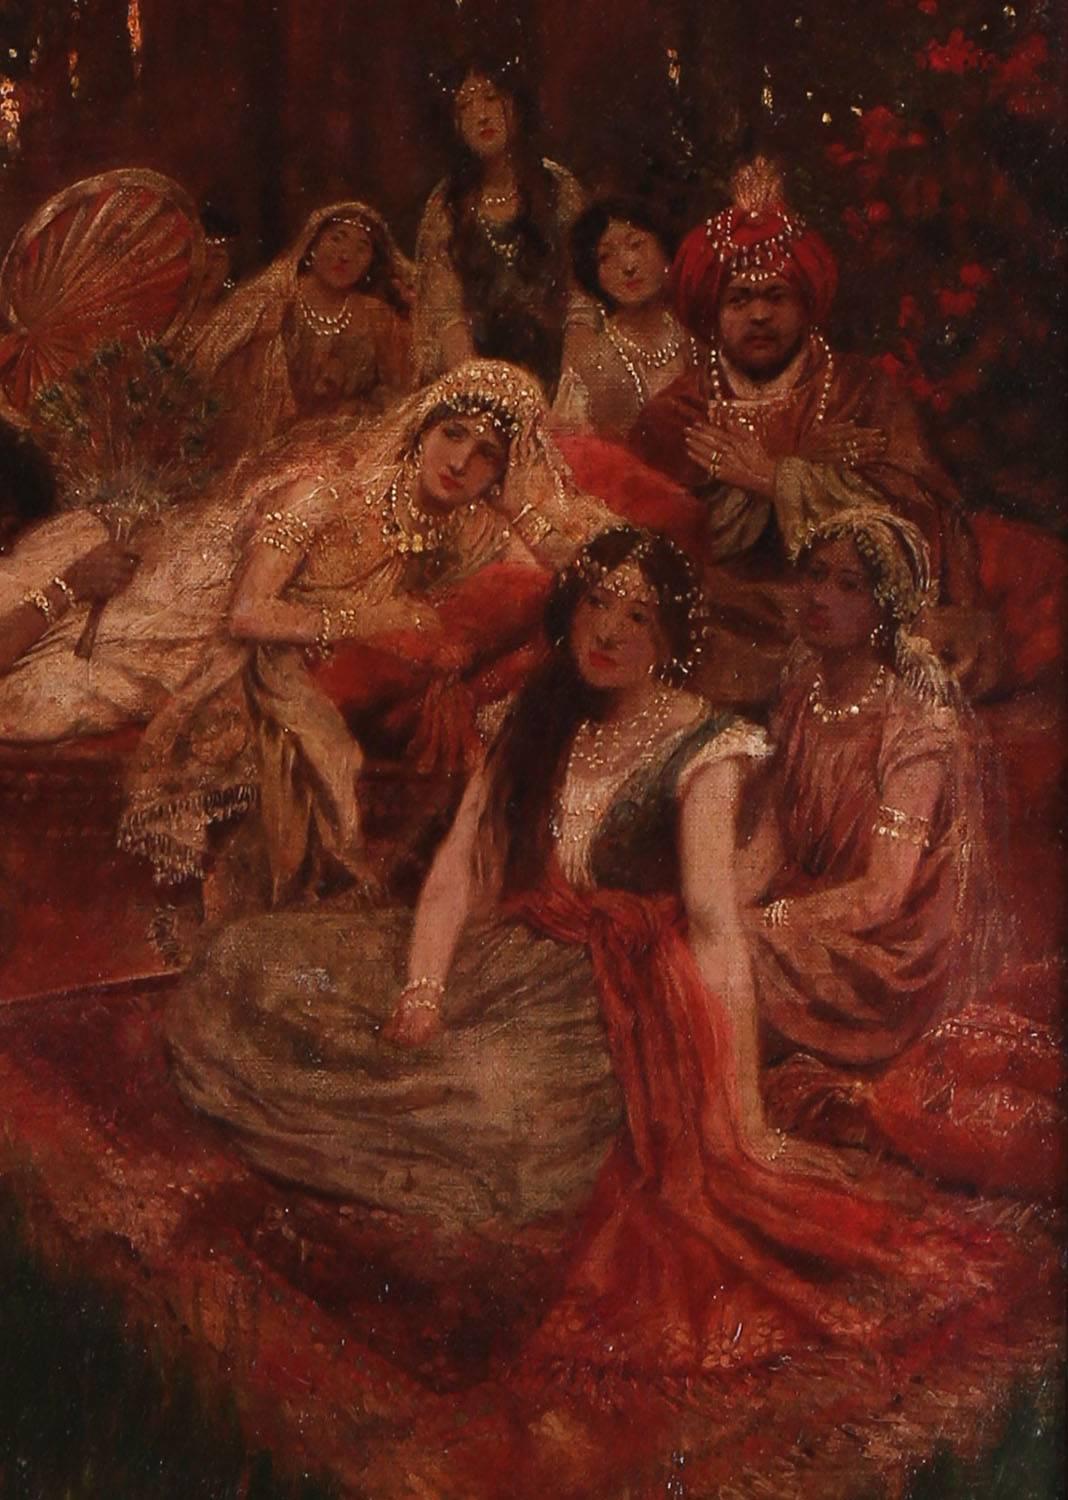 A deftly rendered, intricate, highly decorative oil on canvas painting by noted Brandywine School illustrator Arthur E. Becher, a student of Howard Pyle. An East Indian minstrel performs magic feats to the delight of his adoring harem in this